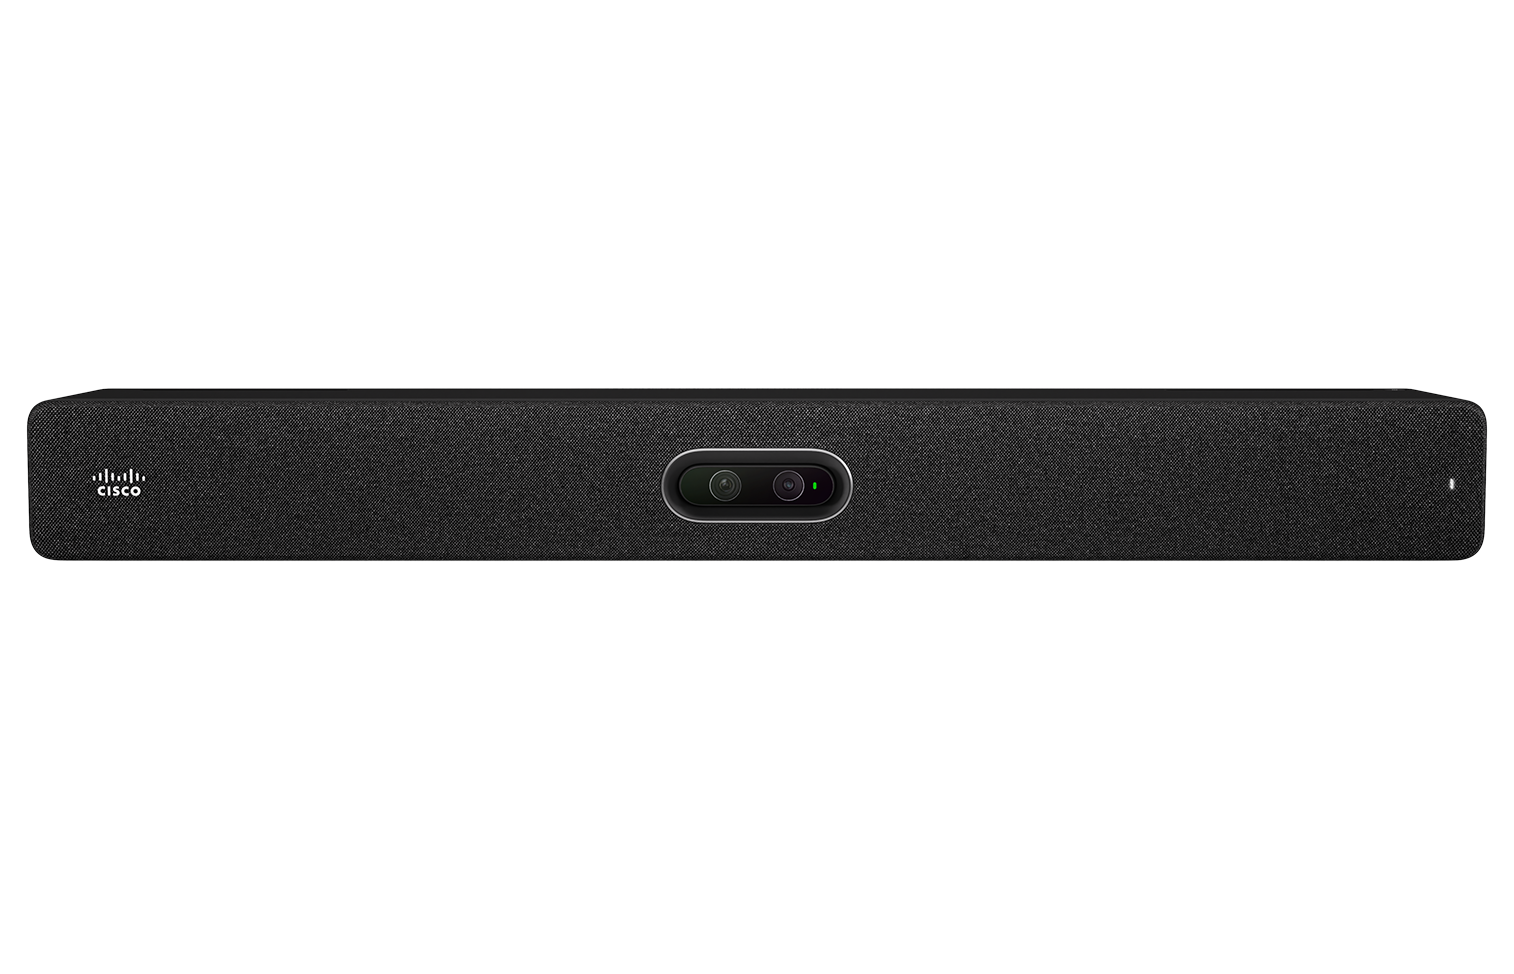 A front view of the Cisco Room Bar Pro in the carbon color option.